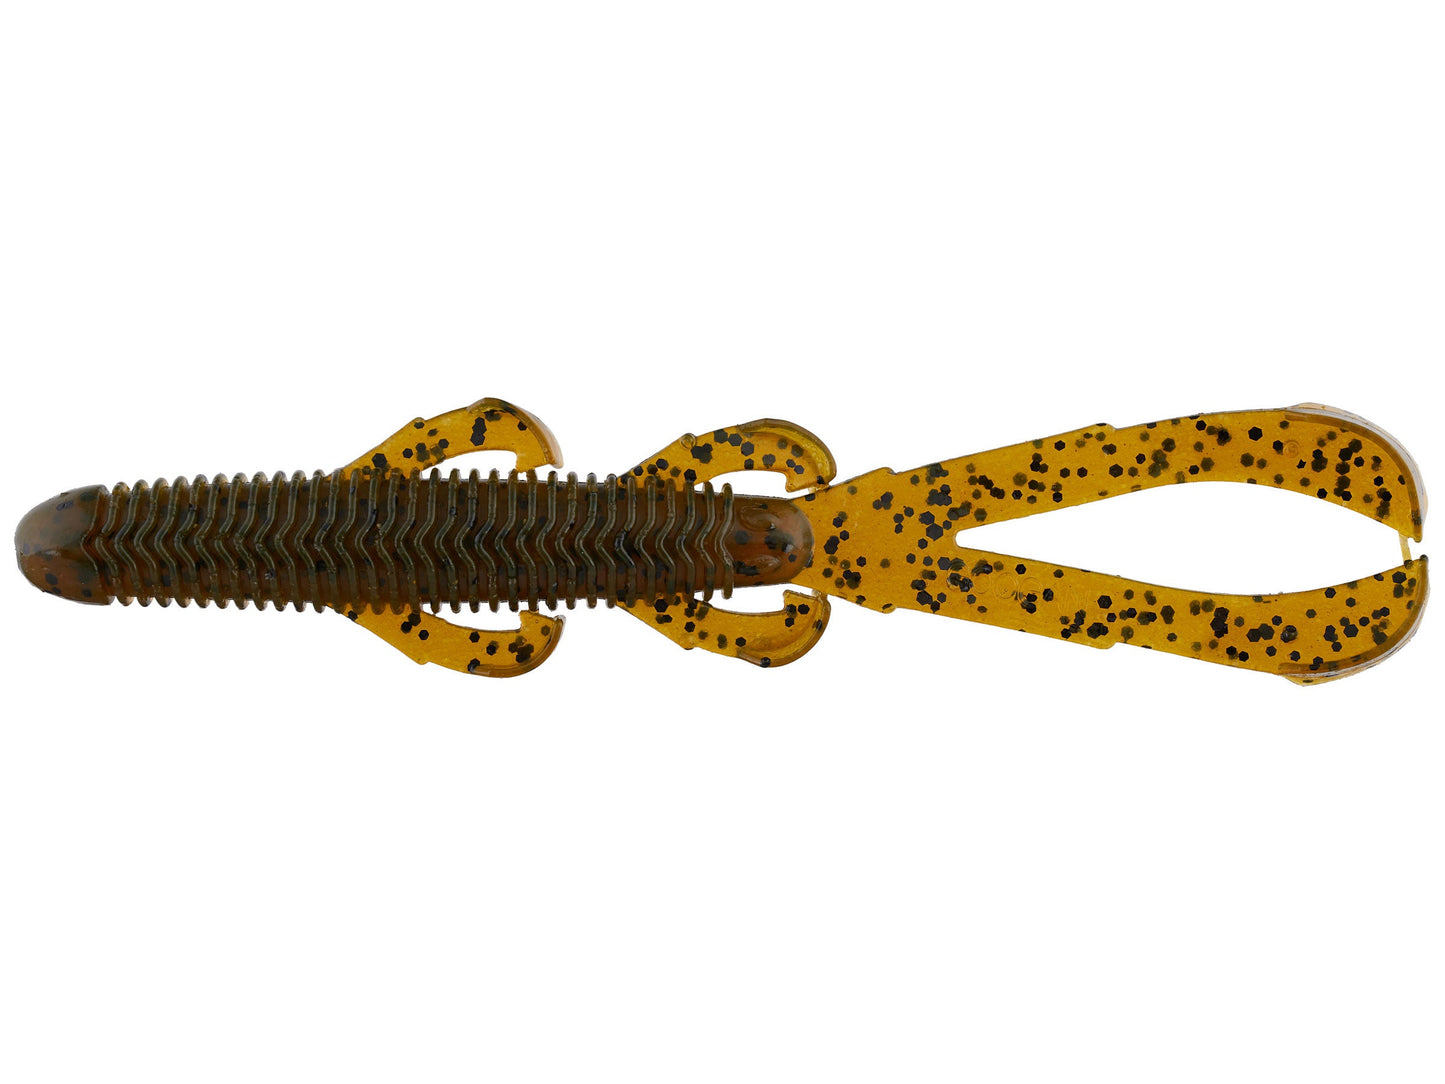 Googan Trench Hawg 6 – Lures and Lead